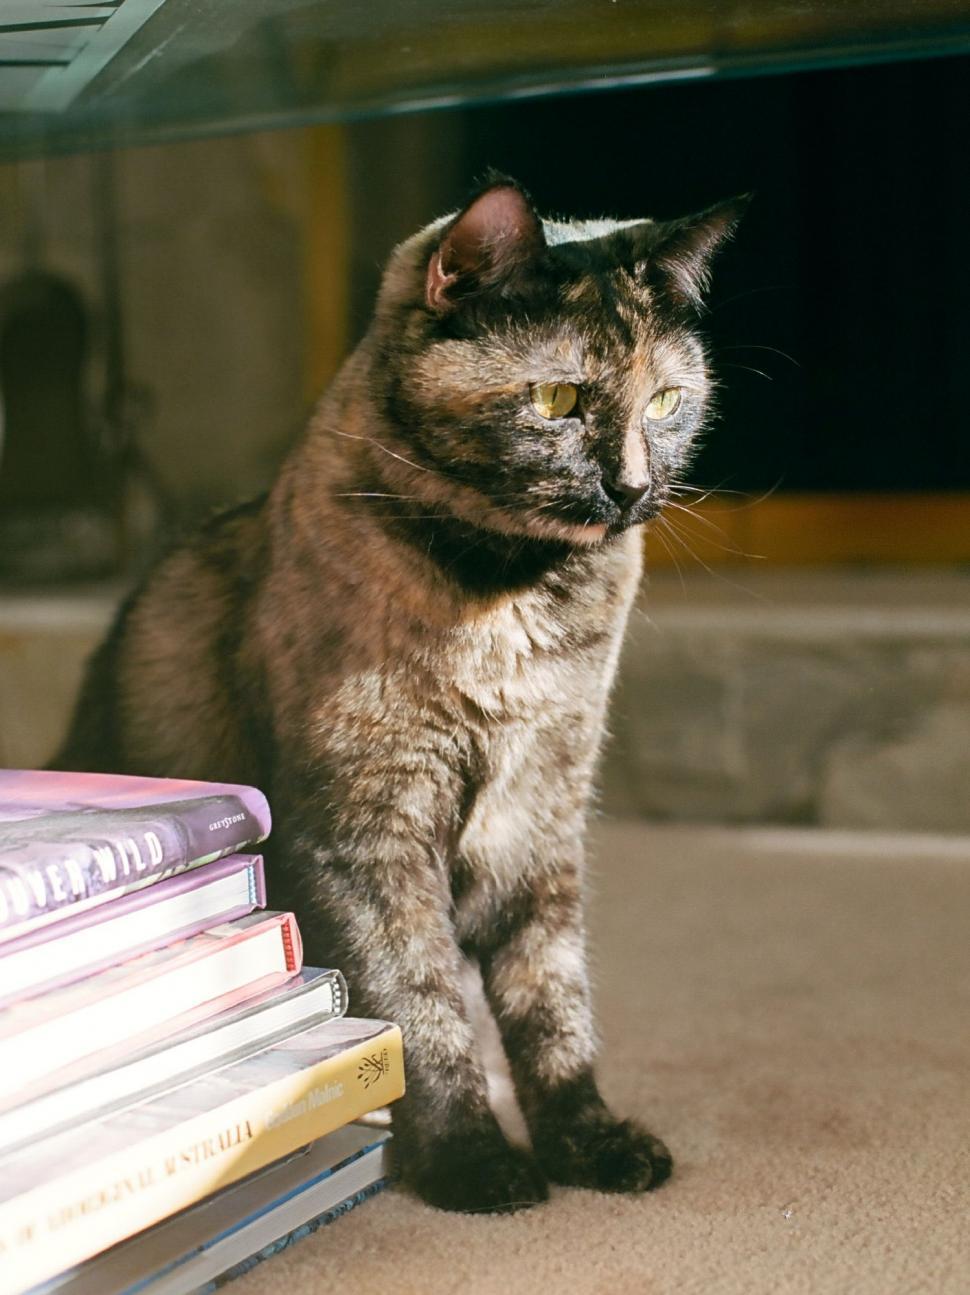 Free Image of Cat Sitting Next to Stack of Books 